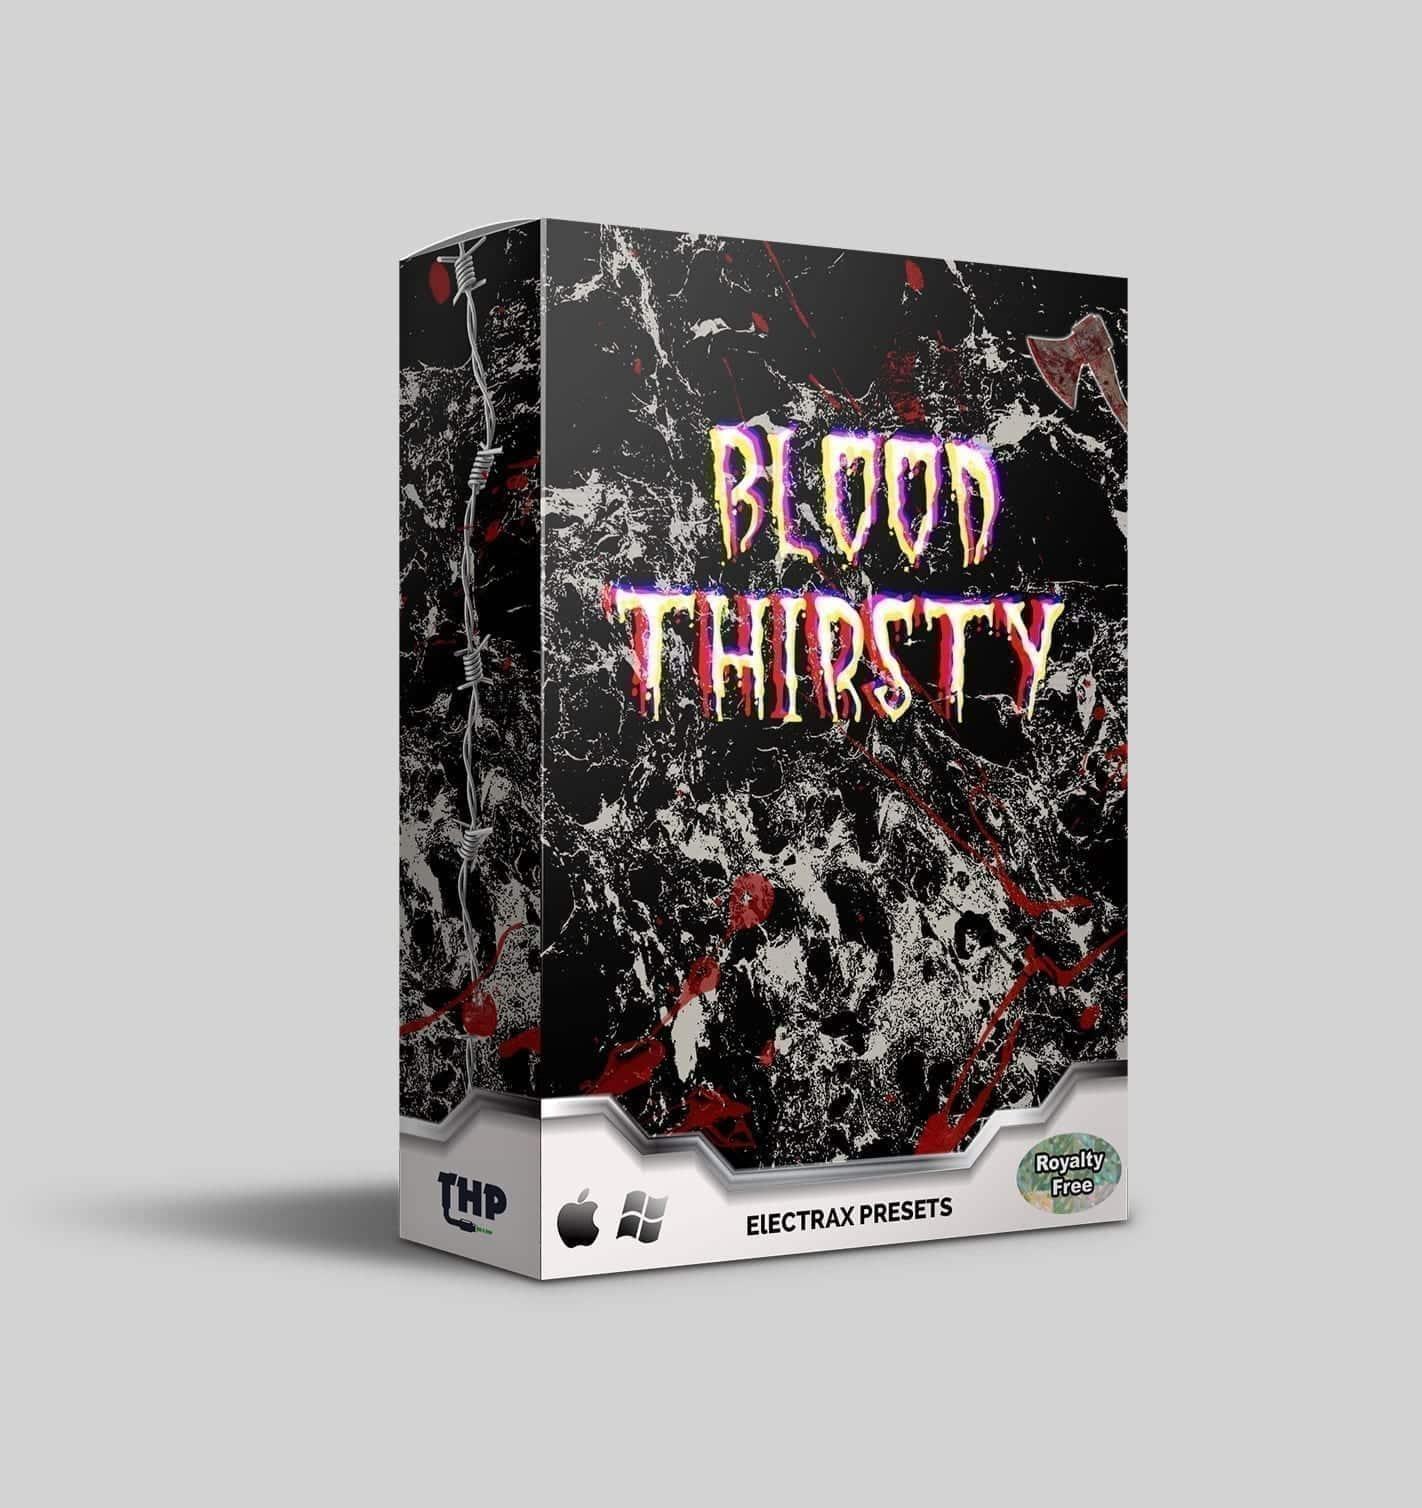 Blood Thirsty (ElectraX Presets Bank) - The Highest Producers